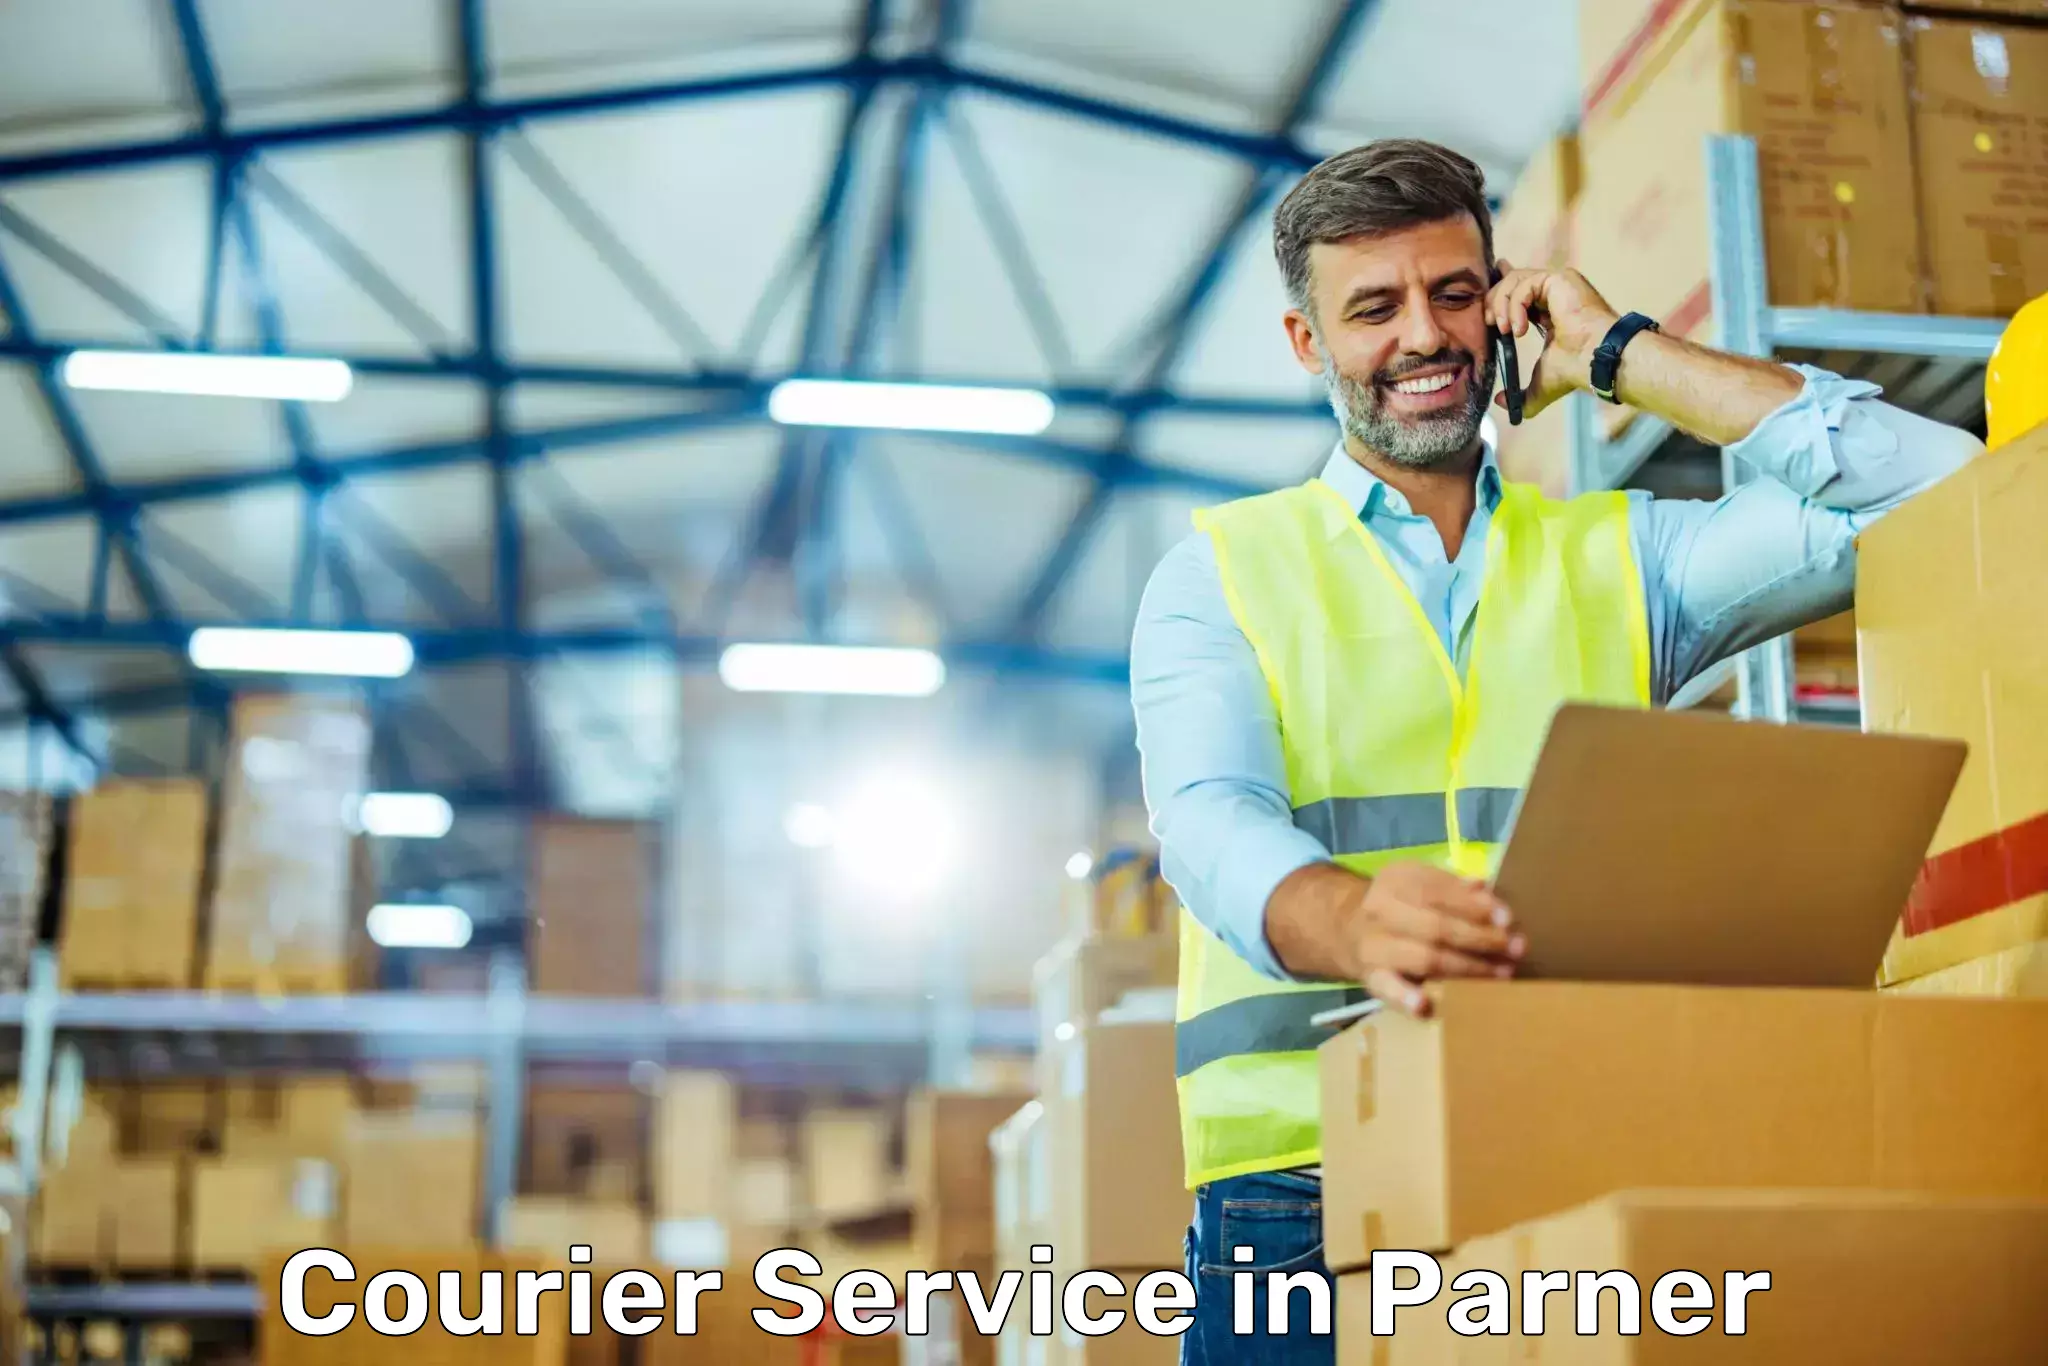 Secure package delivery in Parner